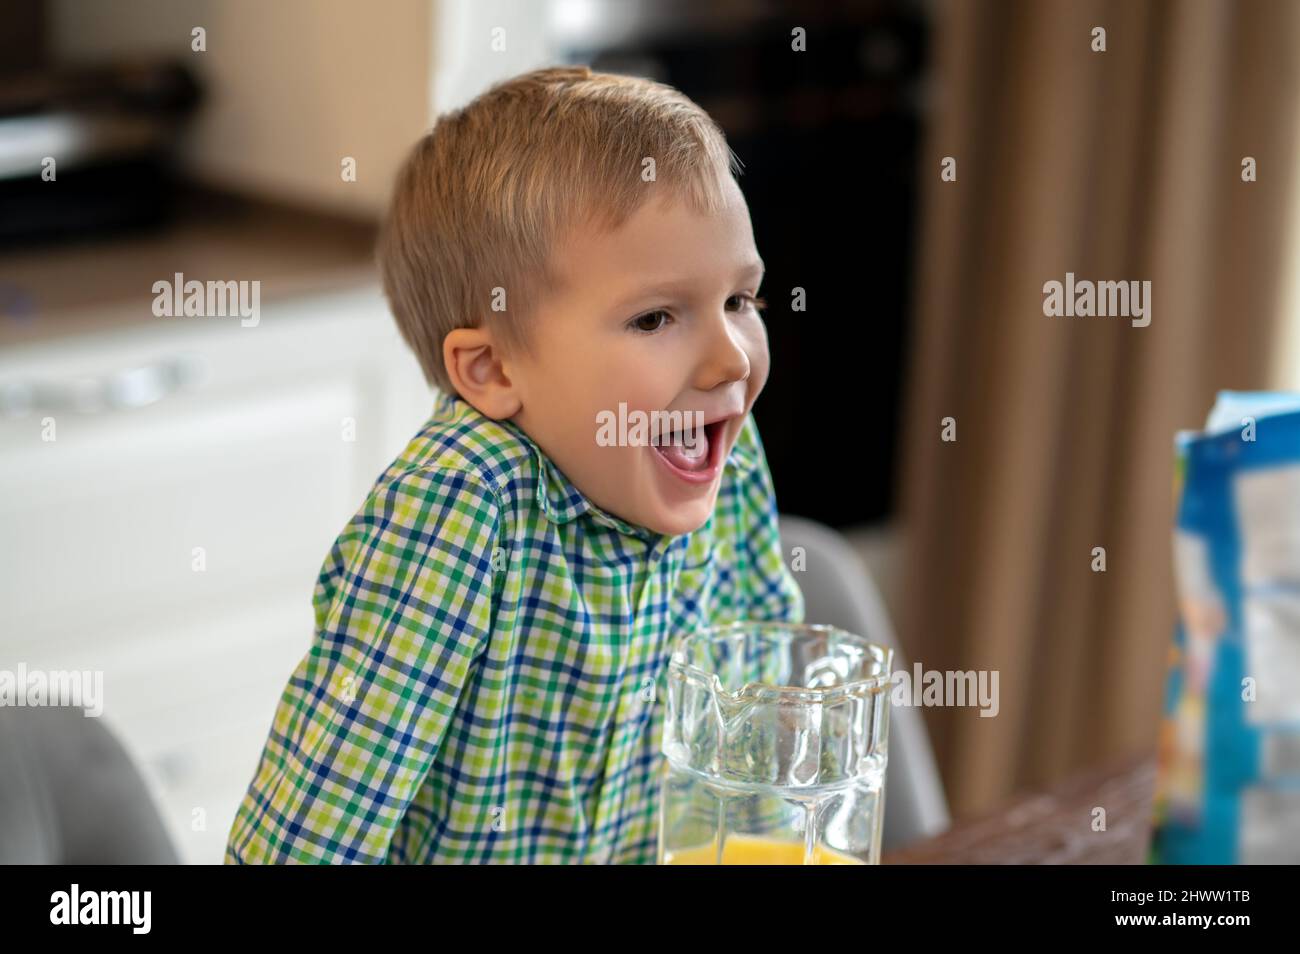 Kid with his mouth open leaning on the kitchen table Stock Photo